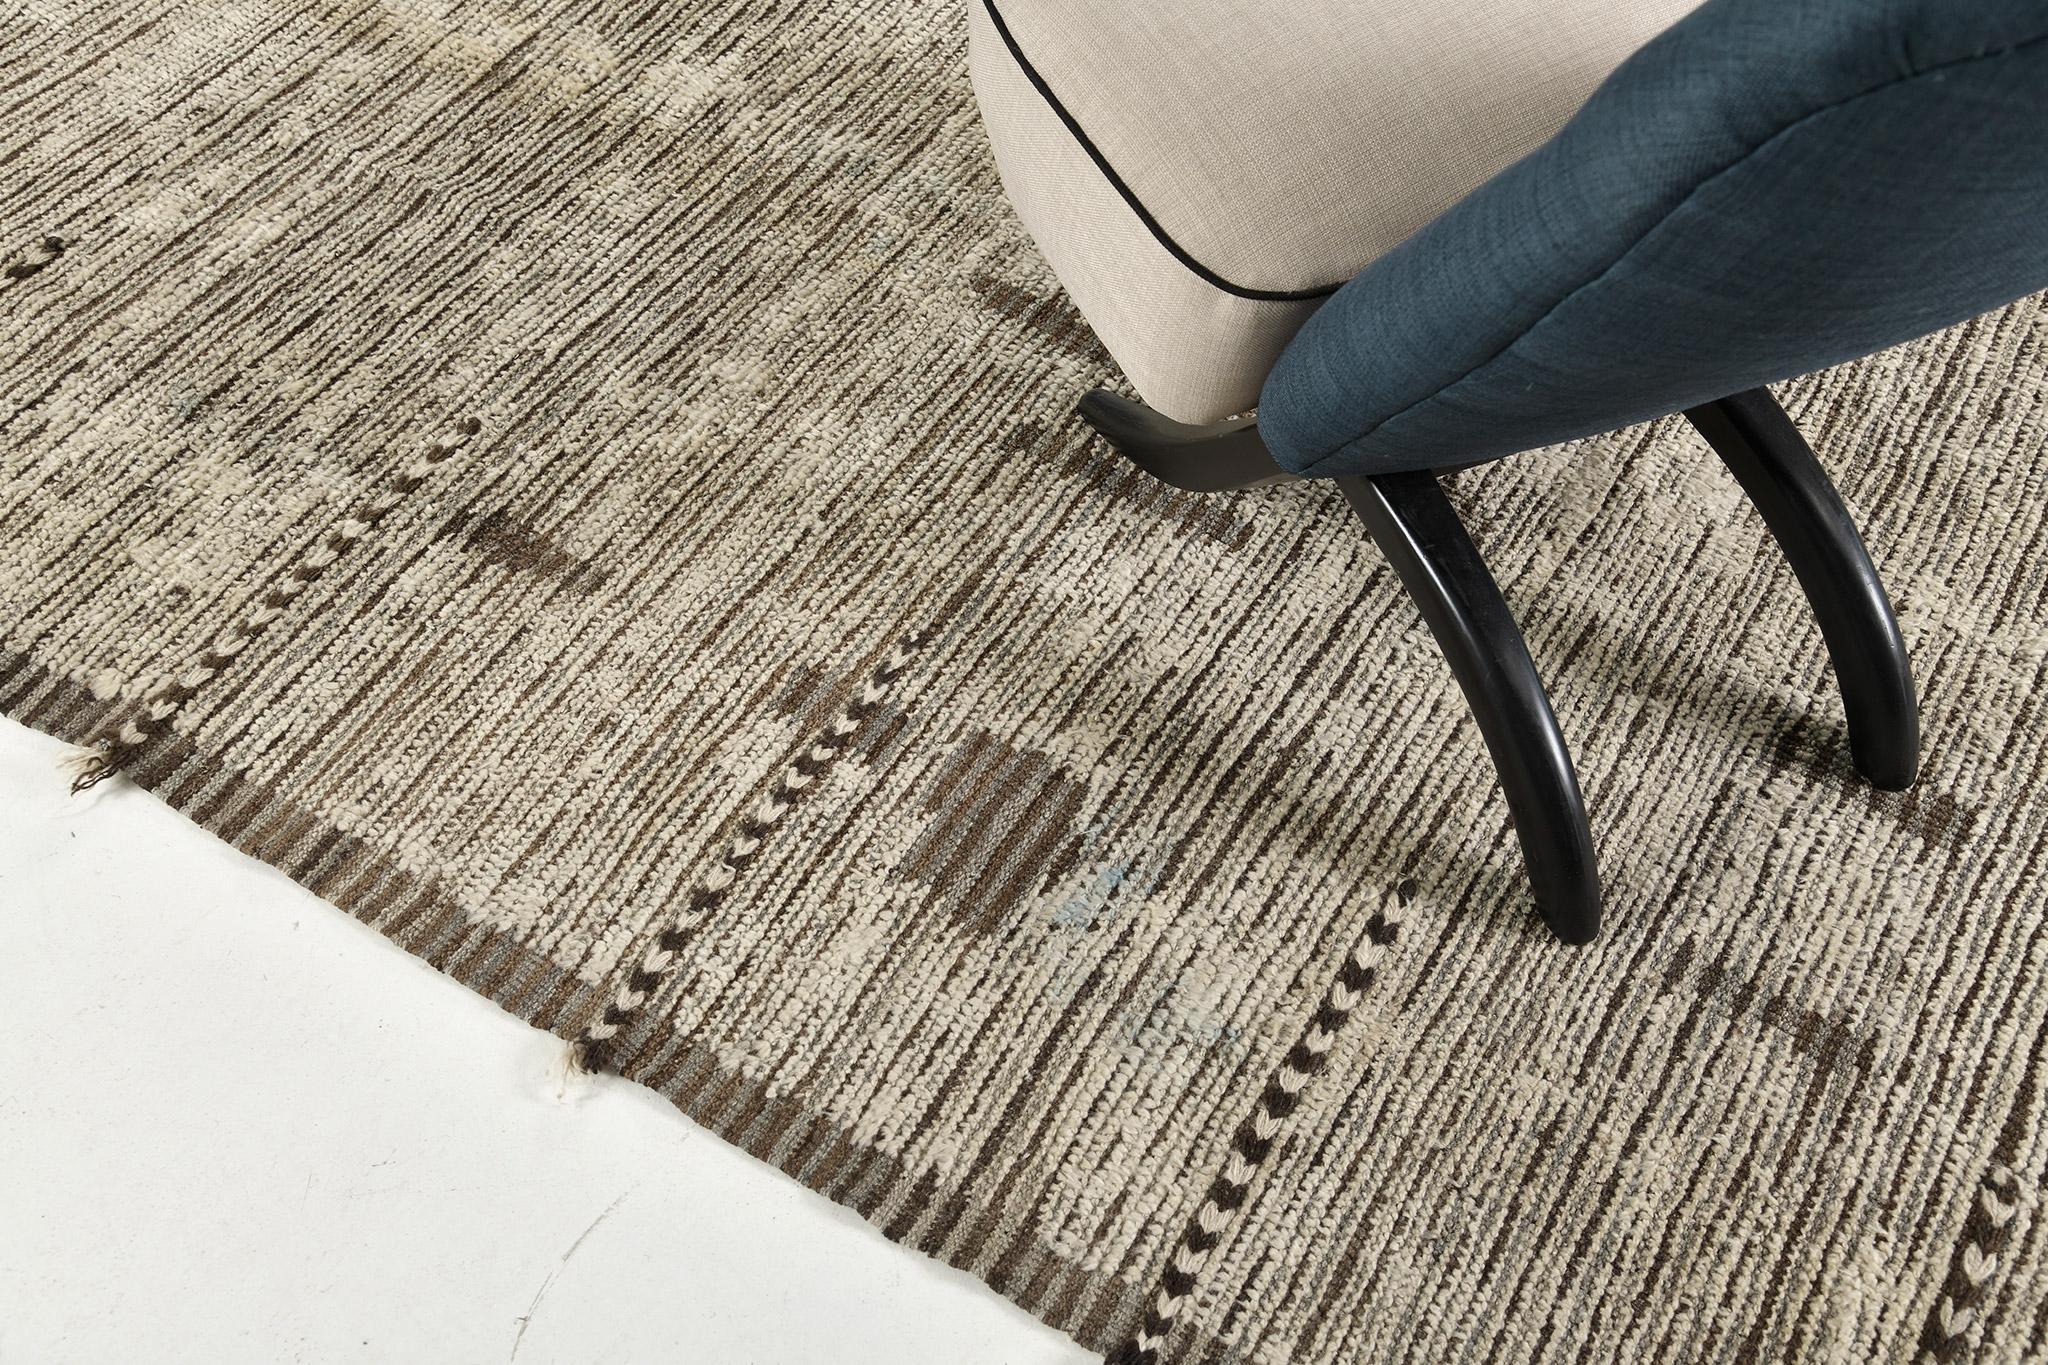 Nakhla is a natural earth-toned rug and a modern interpretation of the Moroccan world. These rugs' irregular patches of cream, blue, and gray resemble the fibers of nature and their ability to be used for crafts such as cords and basketry. Designed